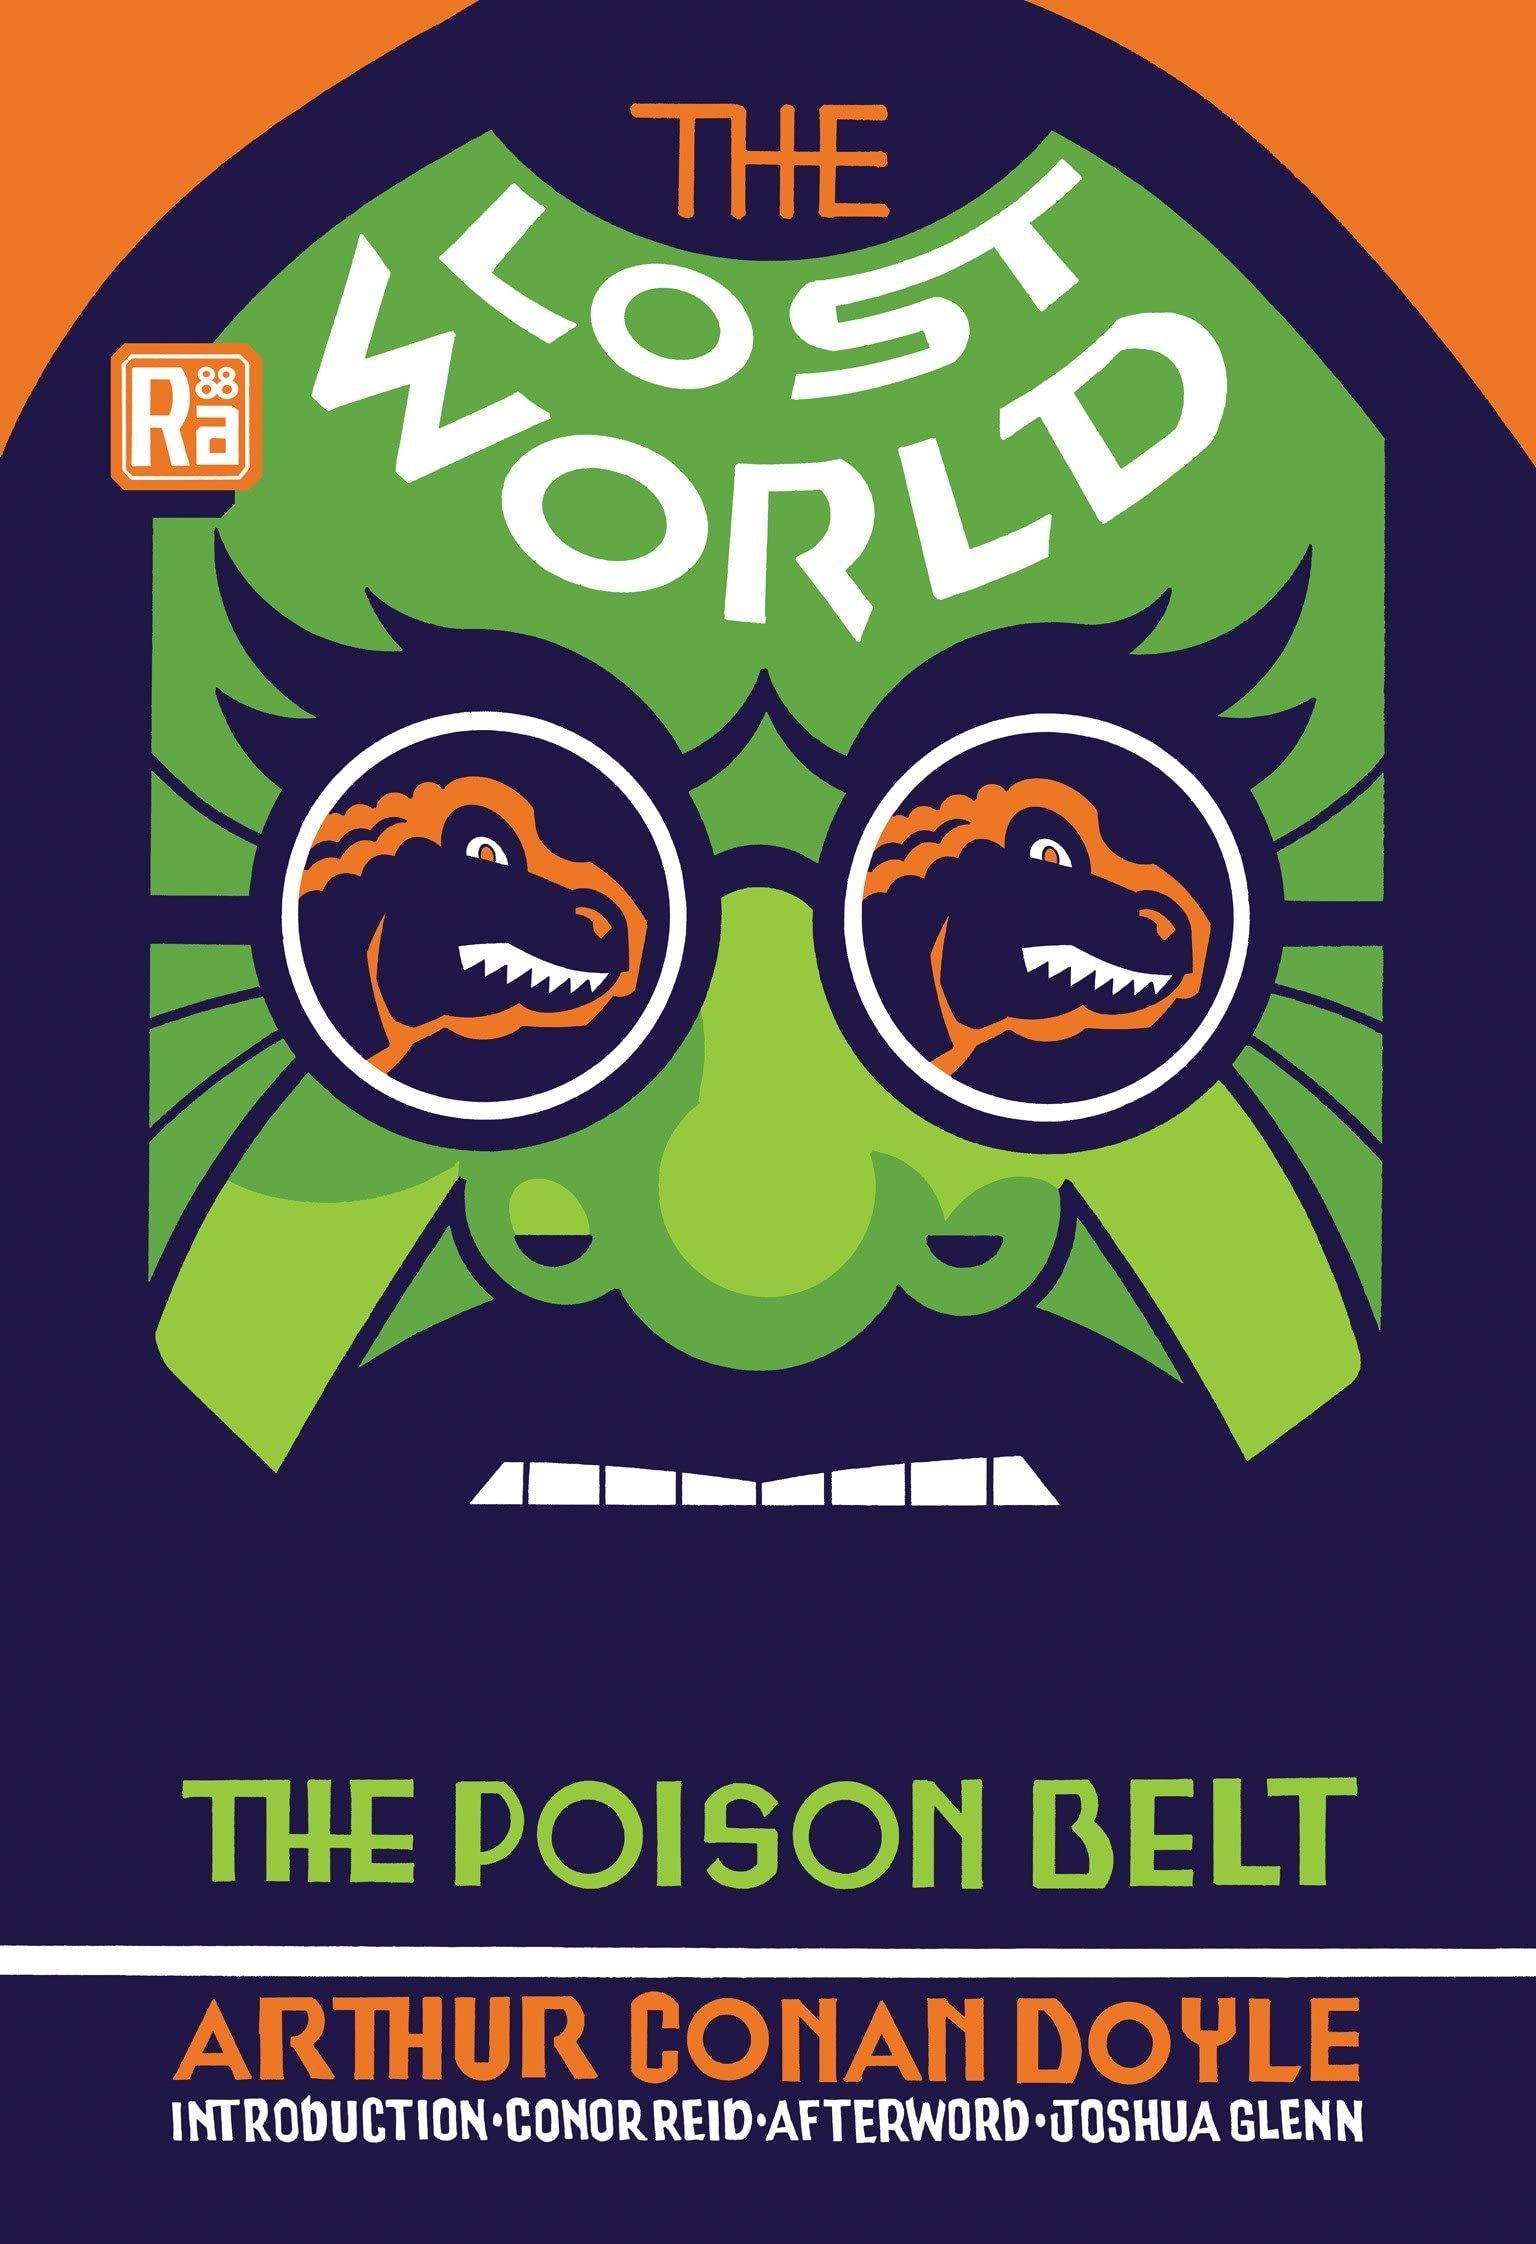 Nature’s on Top This Time: On Arthur Conan Doyle’s “The Lost World and The Poison Belt”